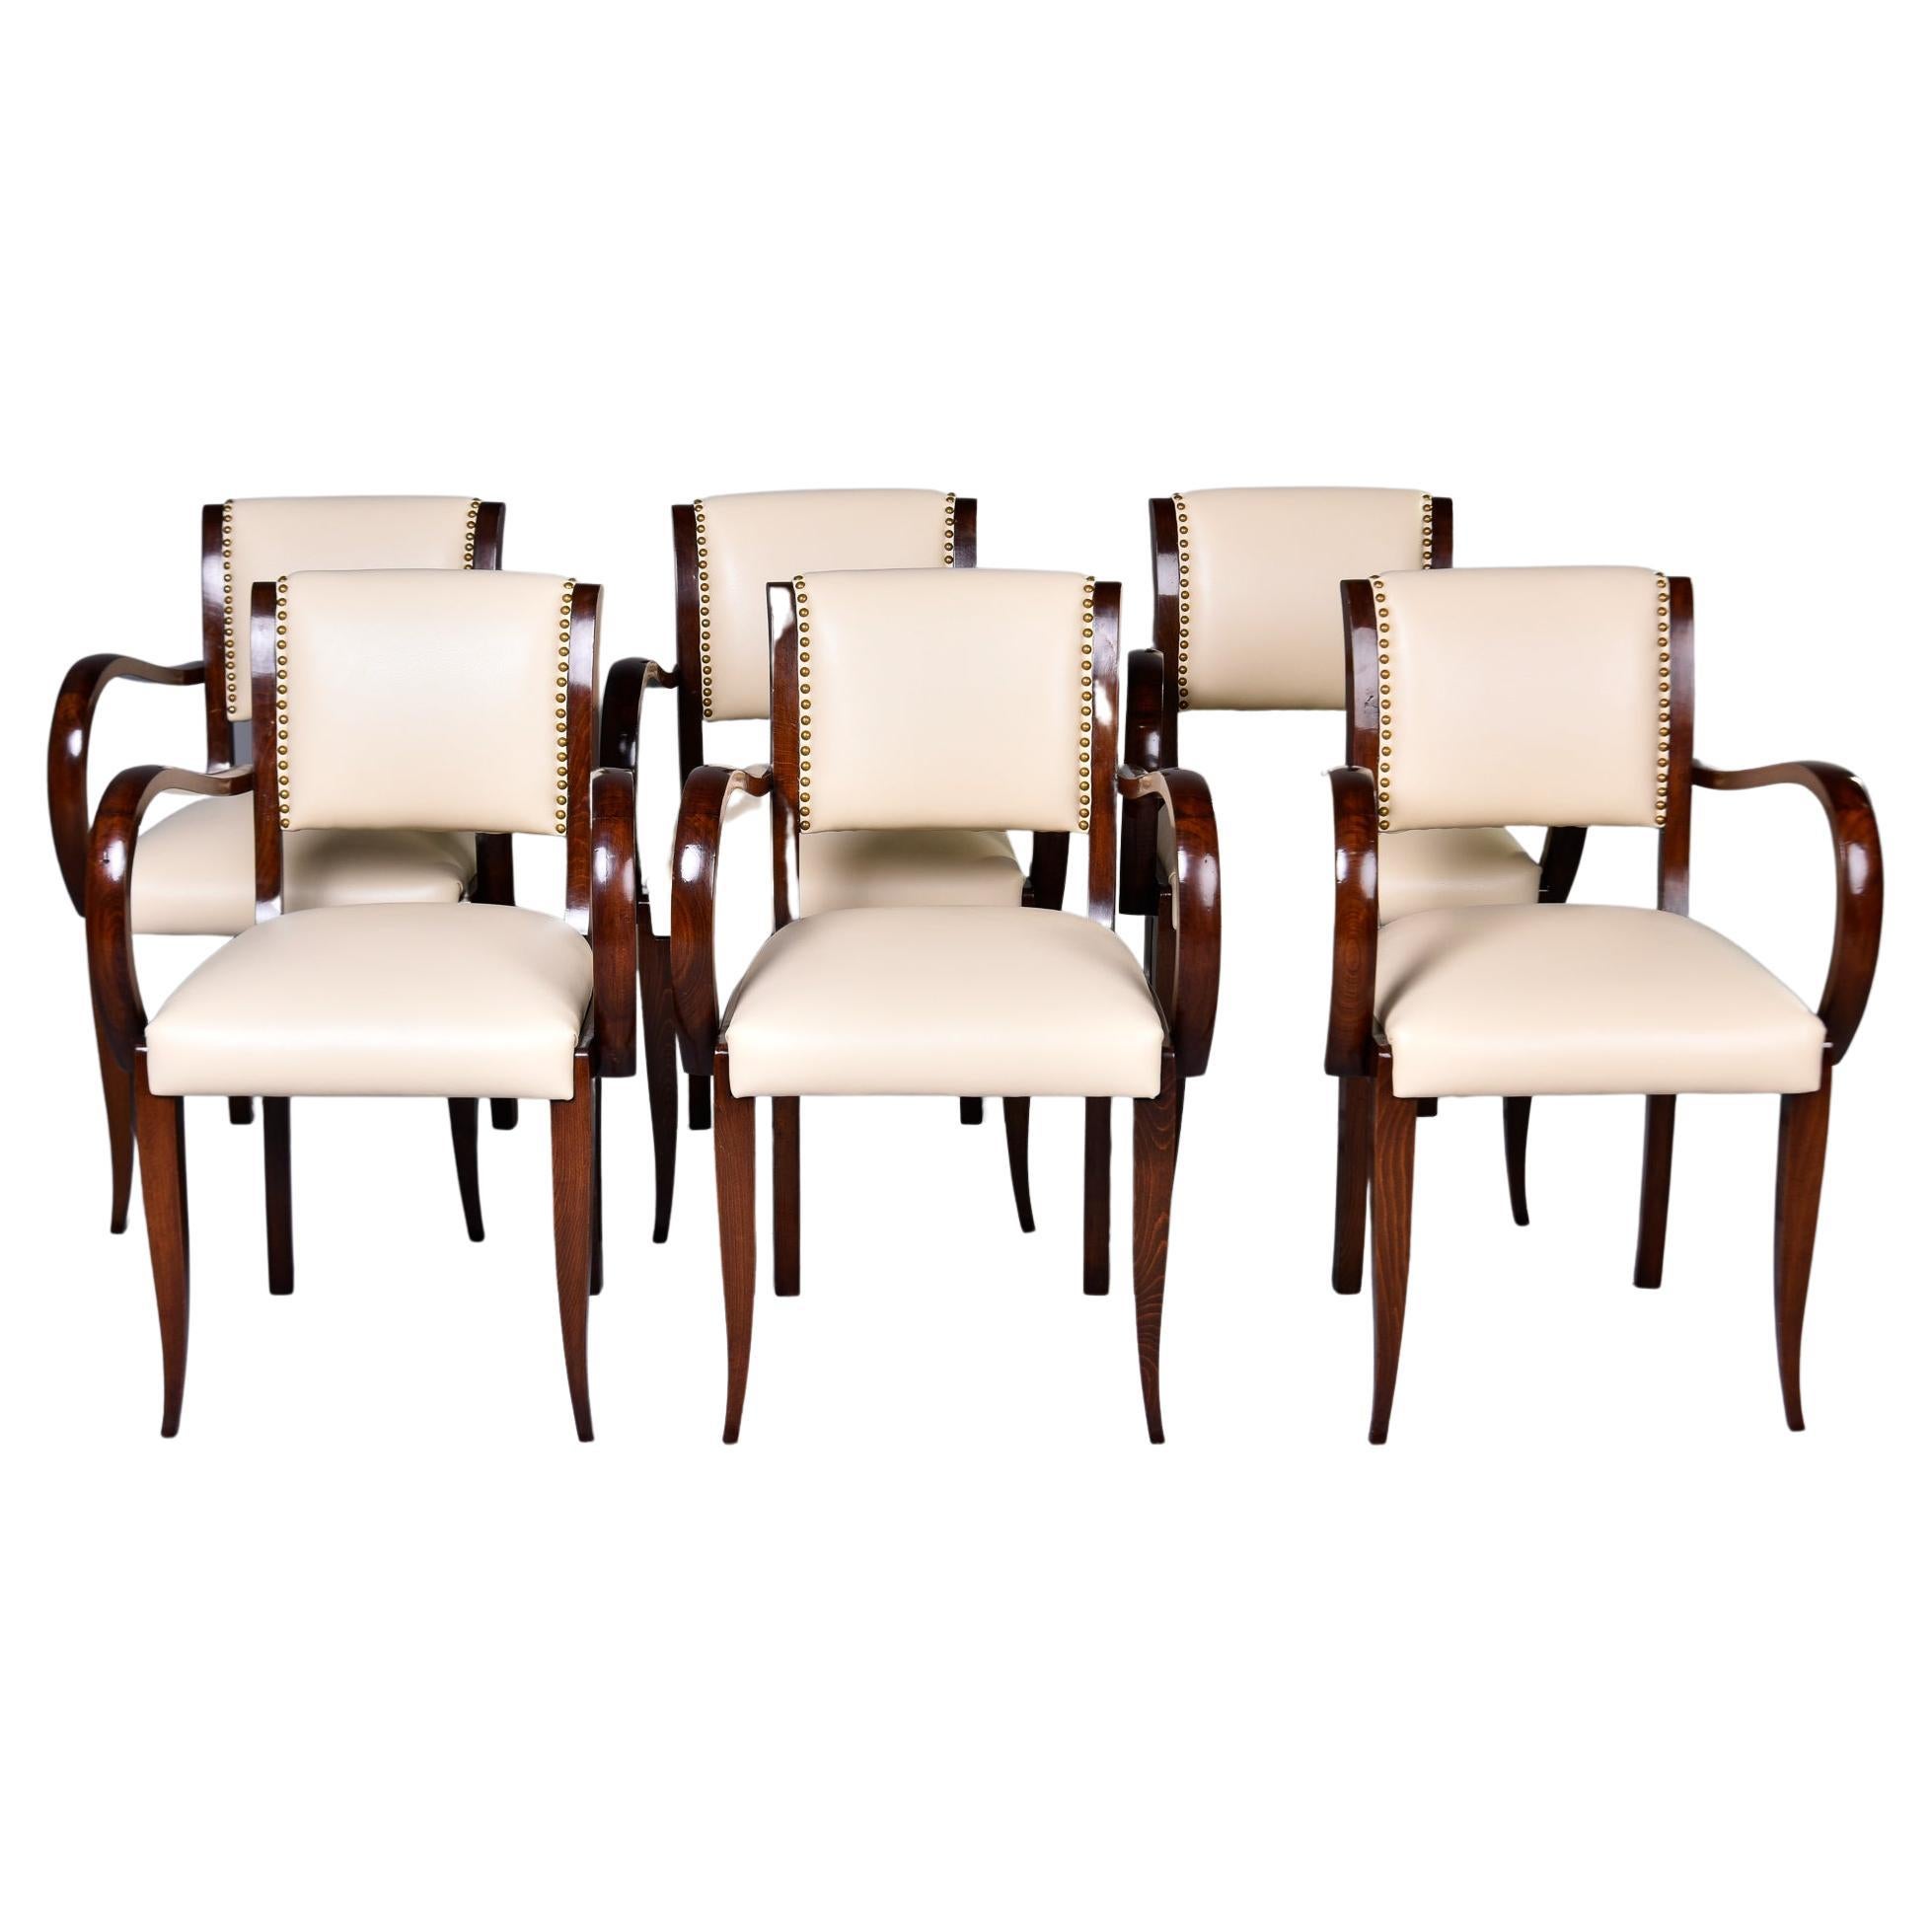 Set Six Vintage French Curved Arm Walnut Chairs with New Leather Upholstery